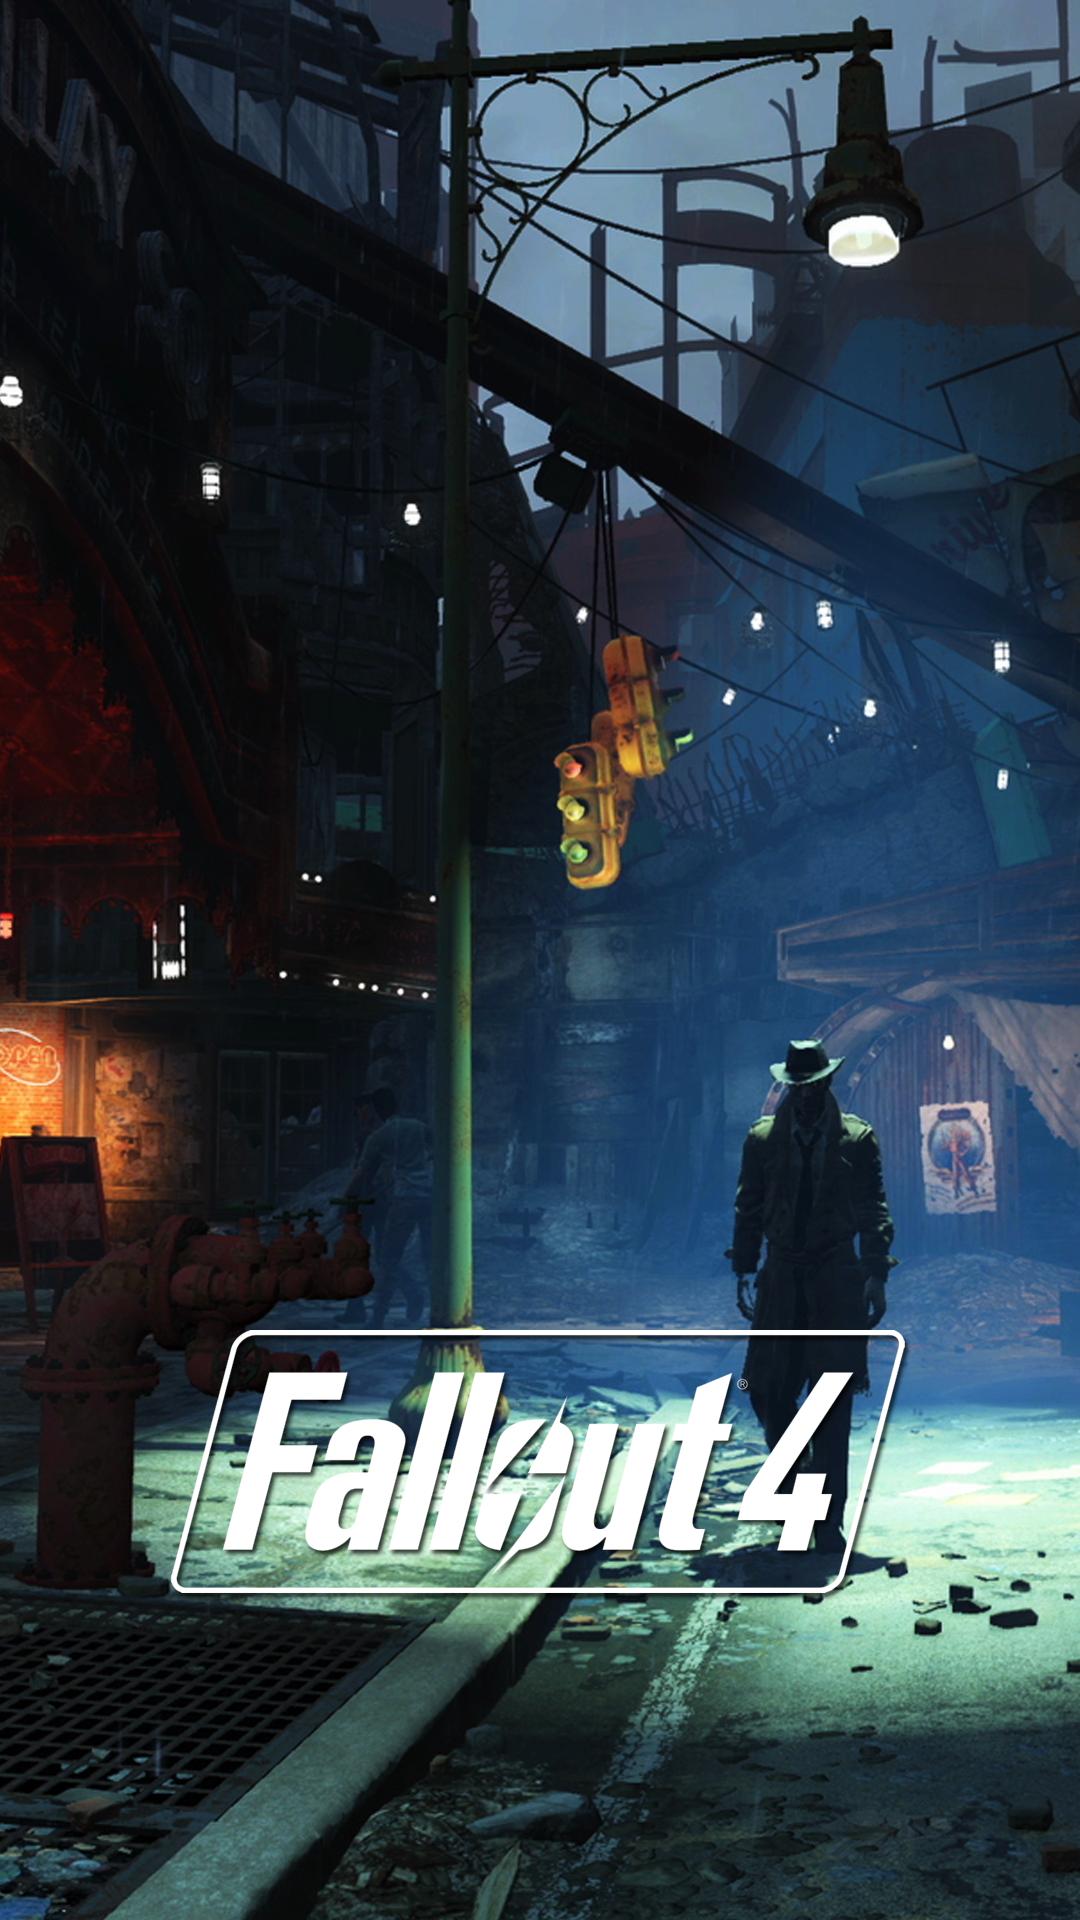 Free Download Fallout 4 Nieuws Prachtige Iphone En Android Wallpapers Voor Fallout 1080x19 For Your Desktop Mobile Tablet Explore 44 Fallout 4 Android Wallpaper Fallout 4 Wallpaper Hd Fallout 4 Desktop Wallpaper Fallout 4 Live Wallpaper